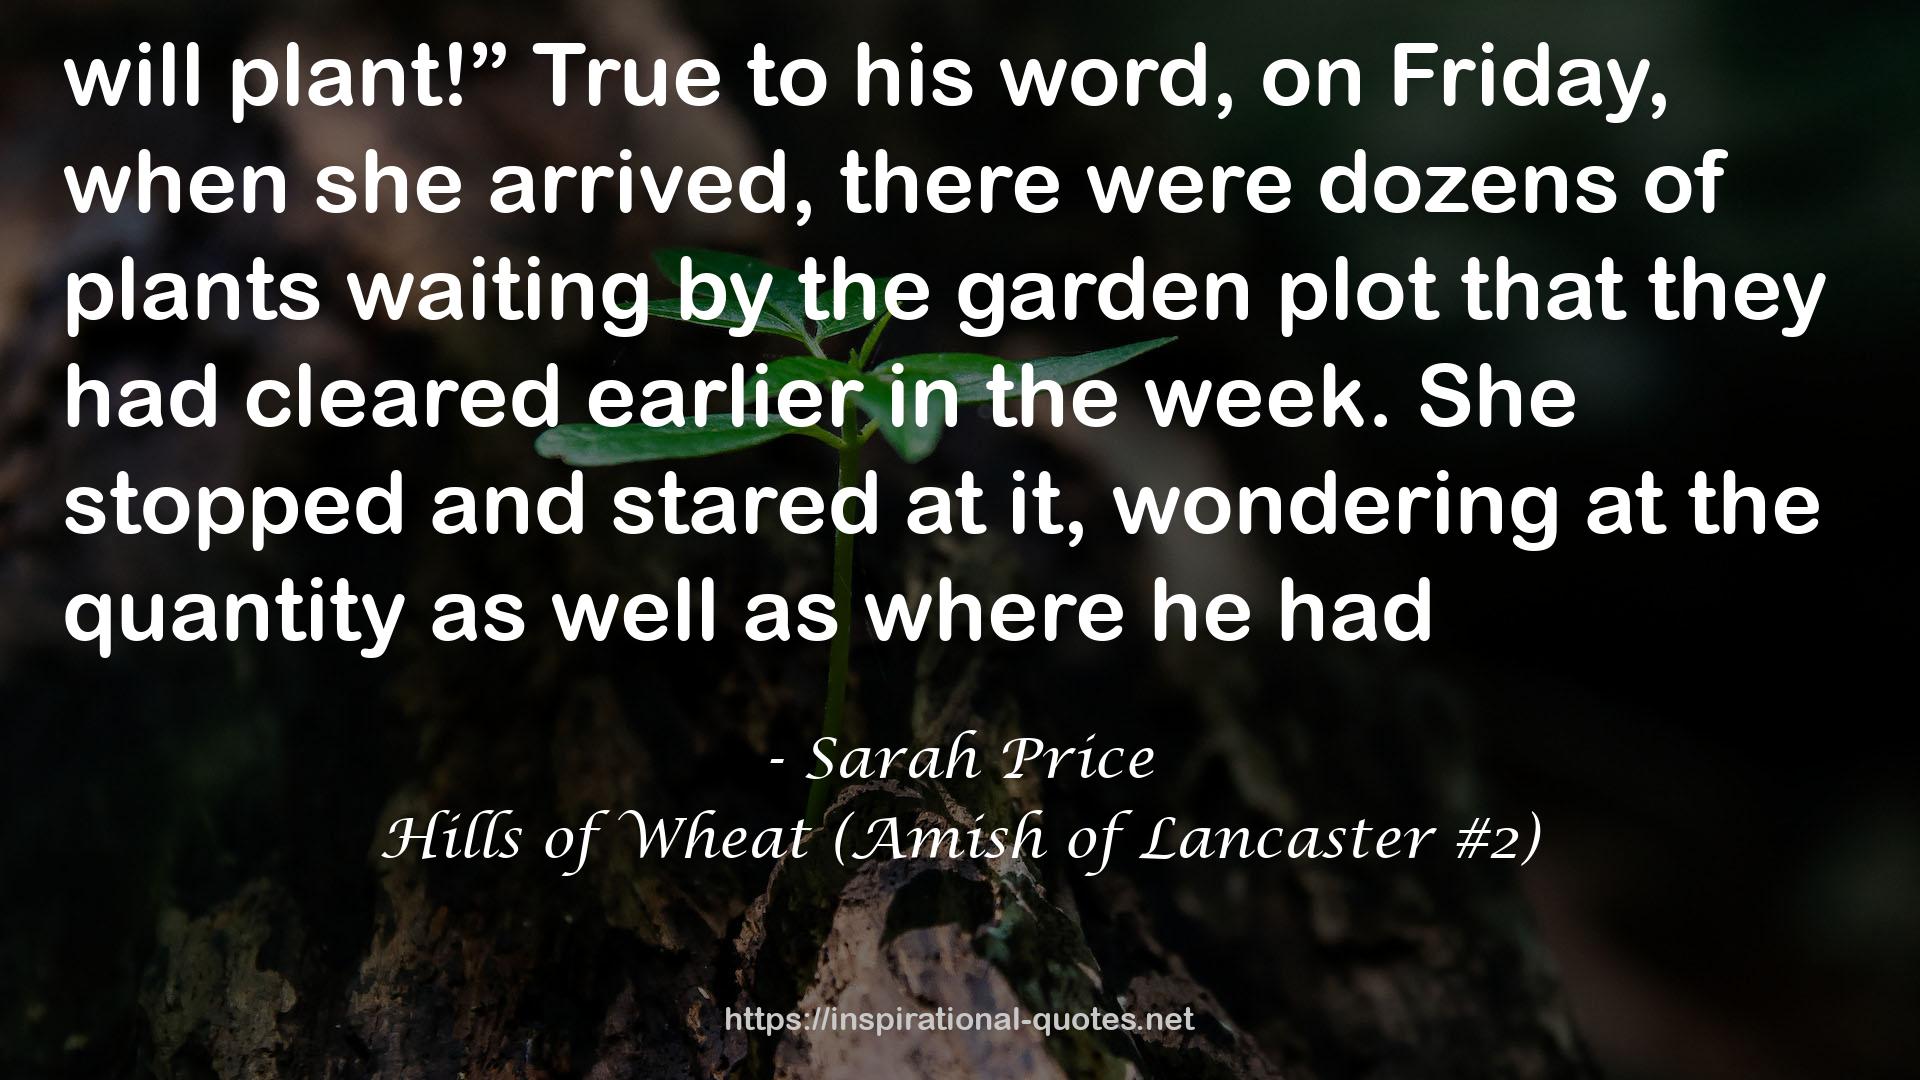 Hills of Wheat (Amish of Lancaster #2) QUOTES